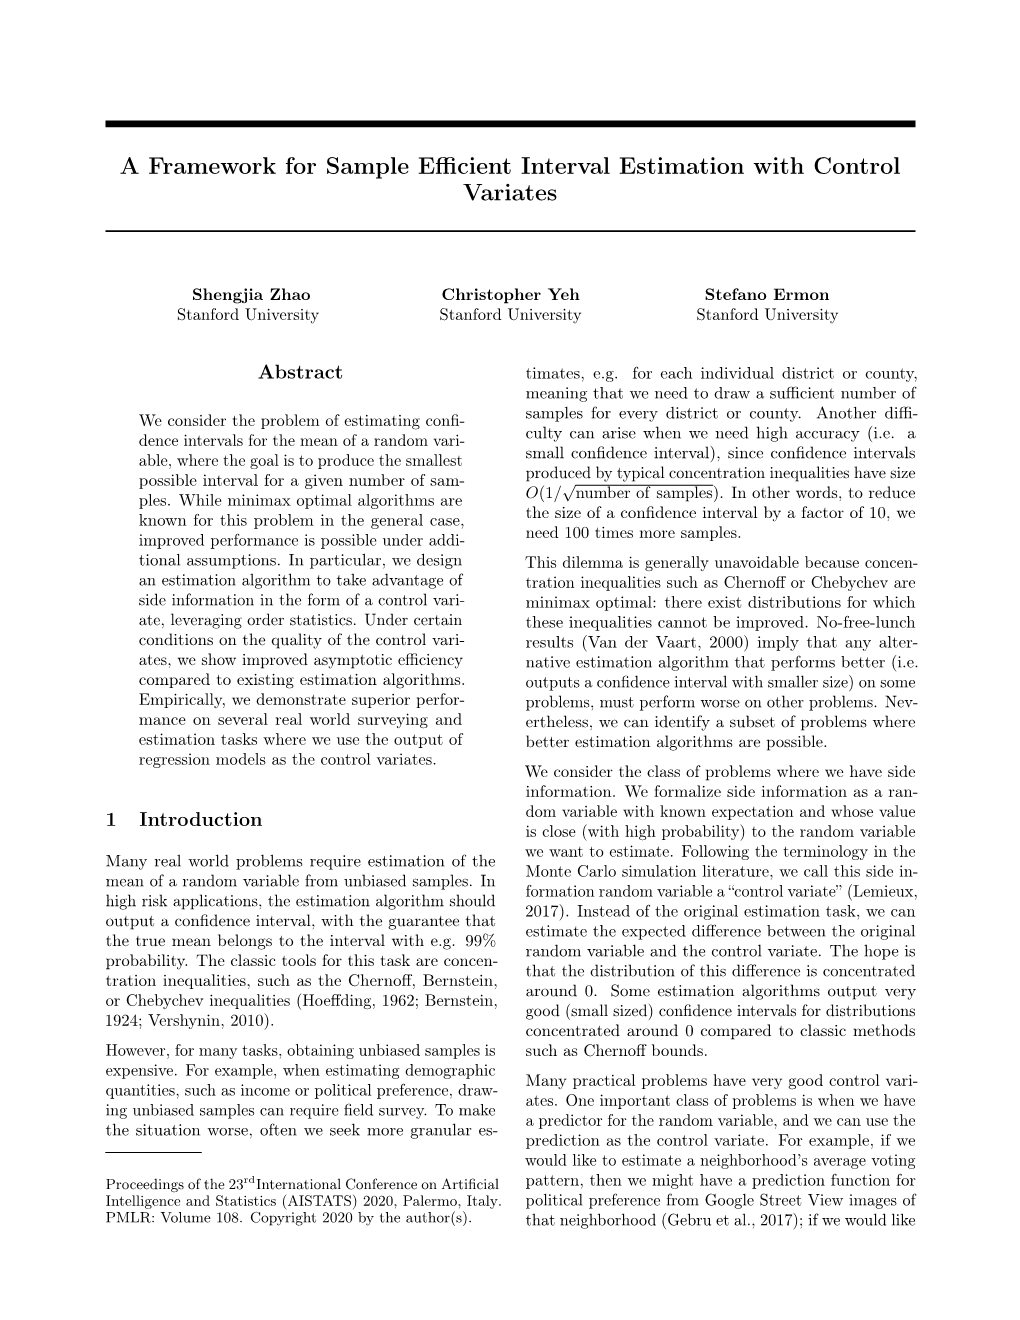 A Framework for Sample Efficient Interval Estimation with Control